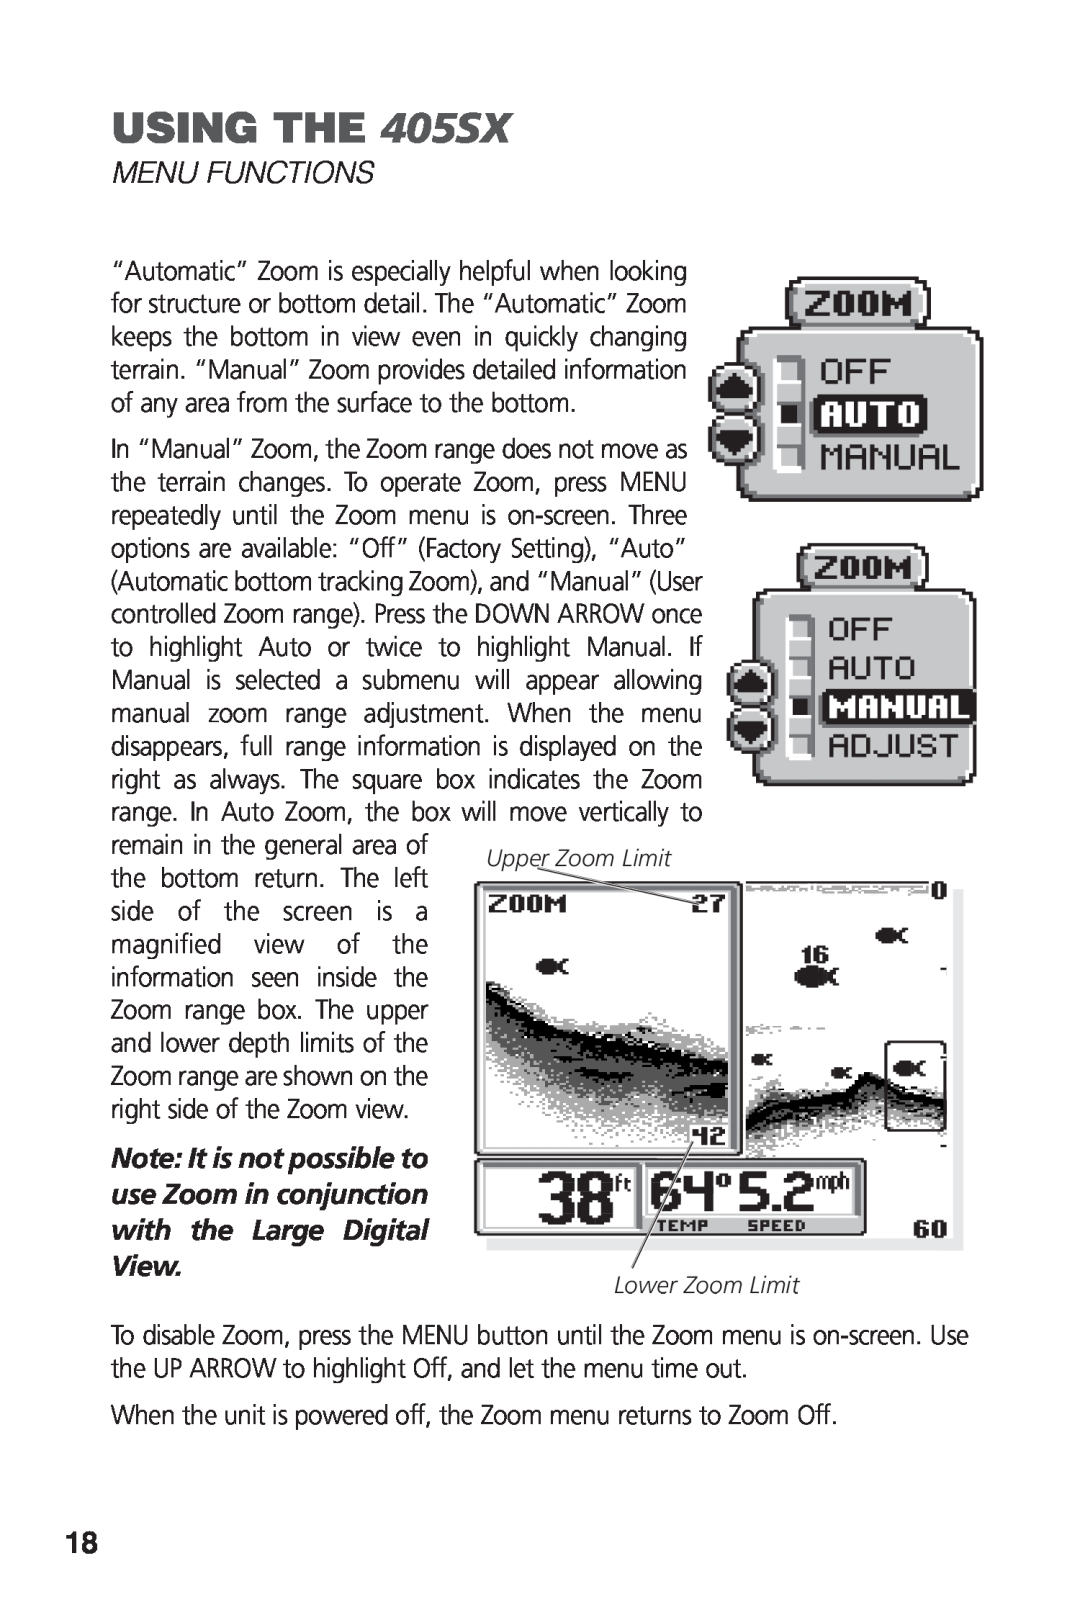 Humminbird manual USING THE 405SX, Menu Functions, the bottom return. The left side of the screen is a, Lower Zoom Limit 